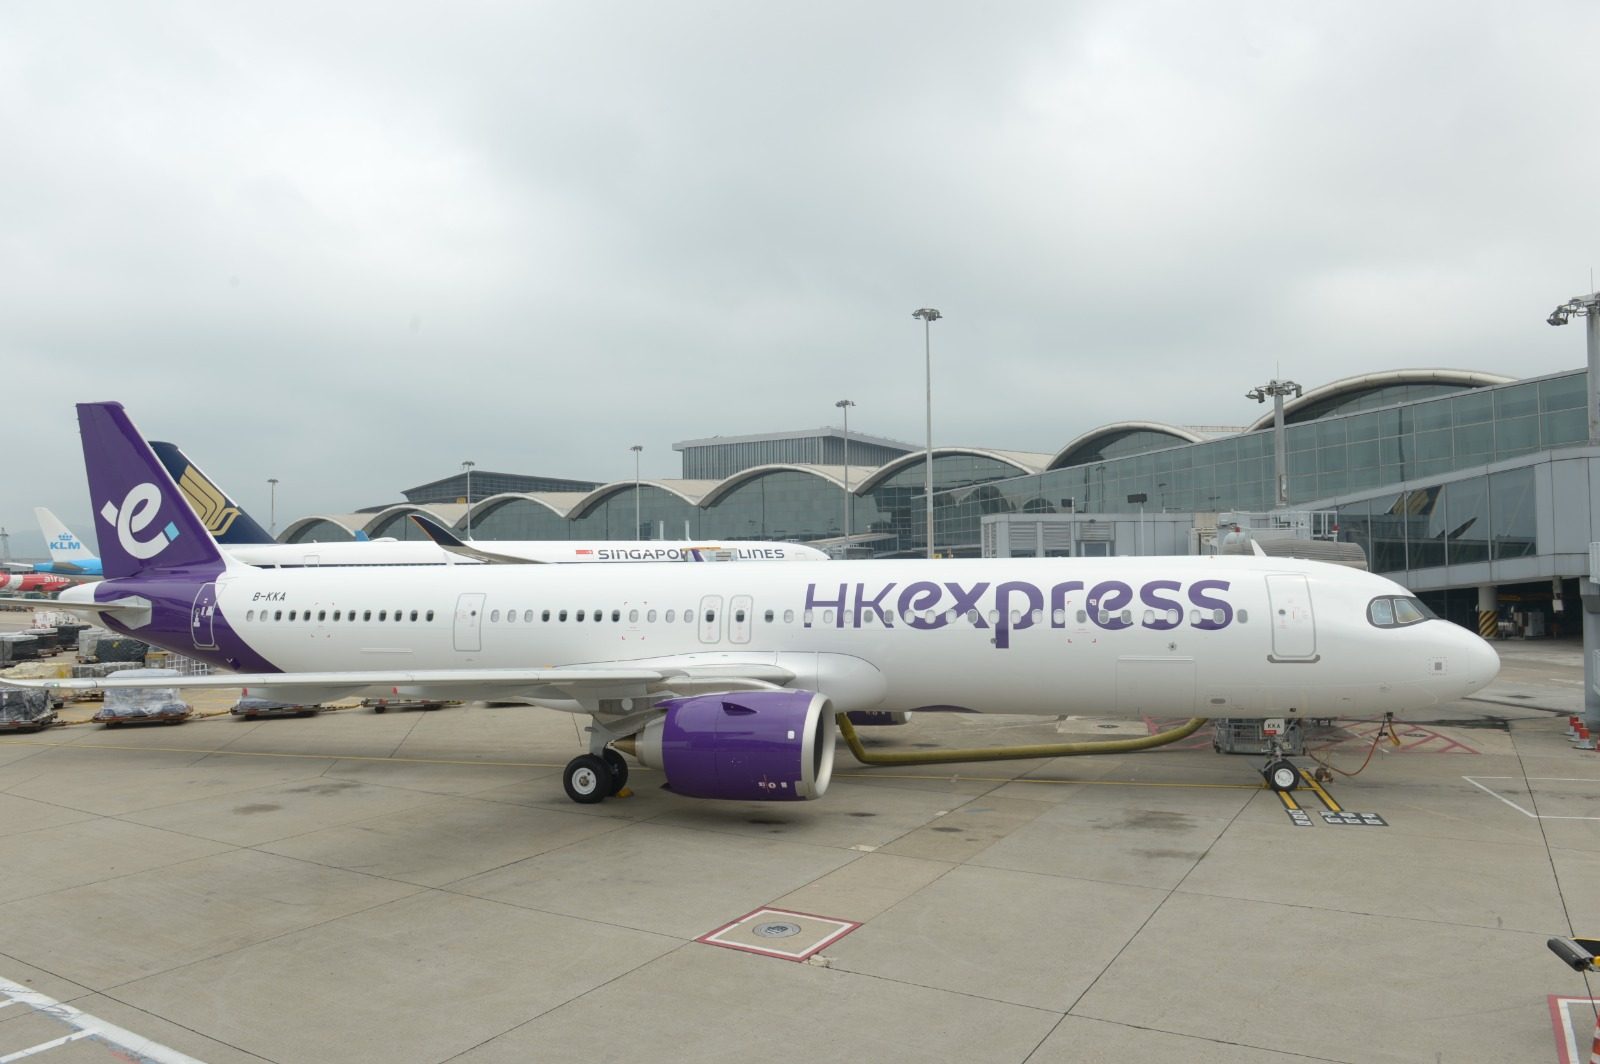 HK Express aircraft in Airport. Photo: Handout